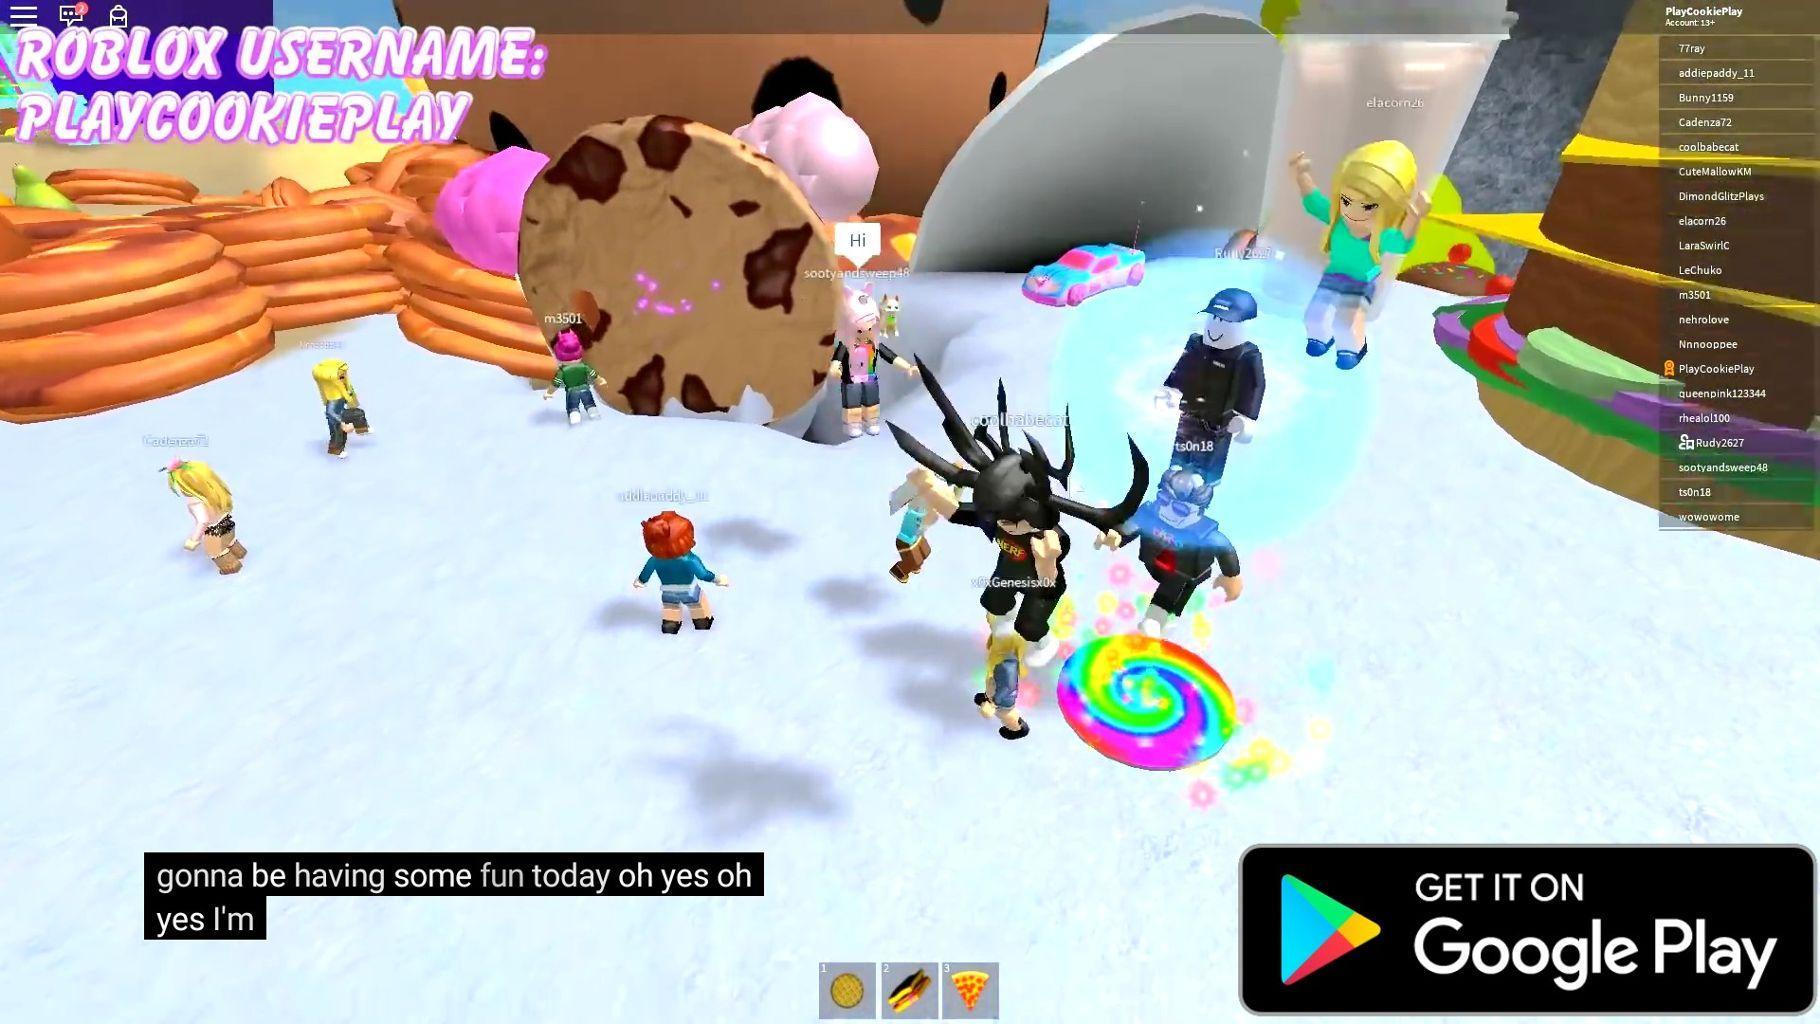 Guide For Cookie Swirl C Roblox For Android Apk Download - guide of cookie swirl c roblox new apk free download